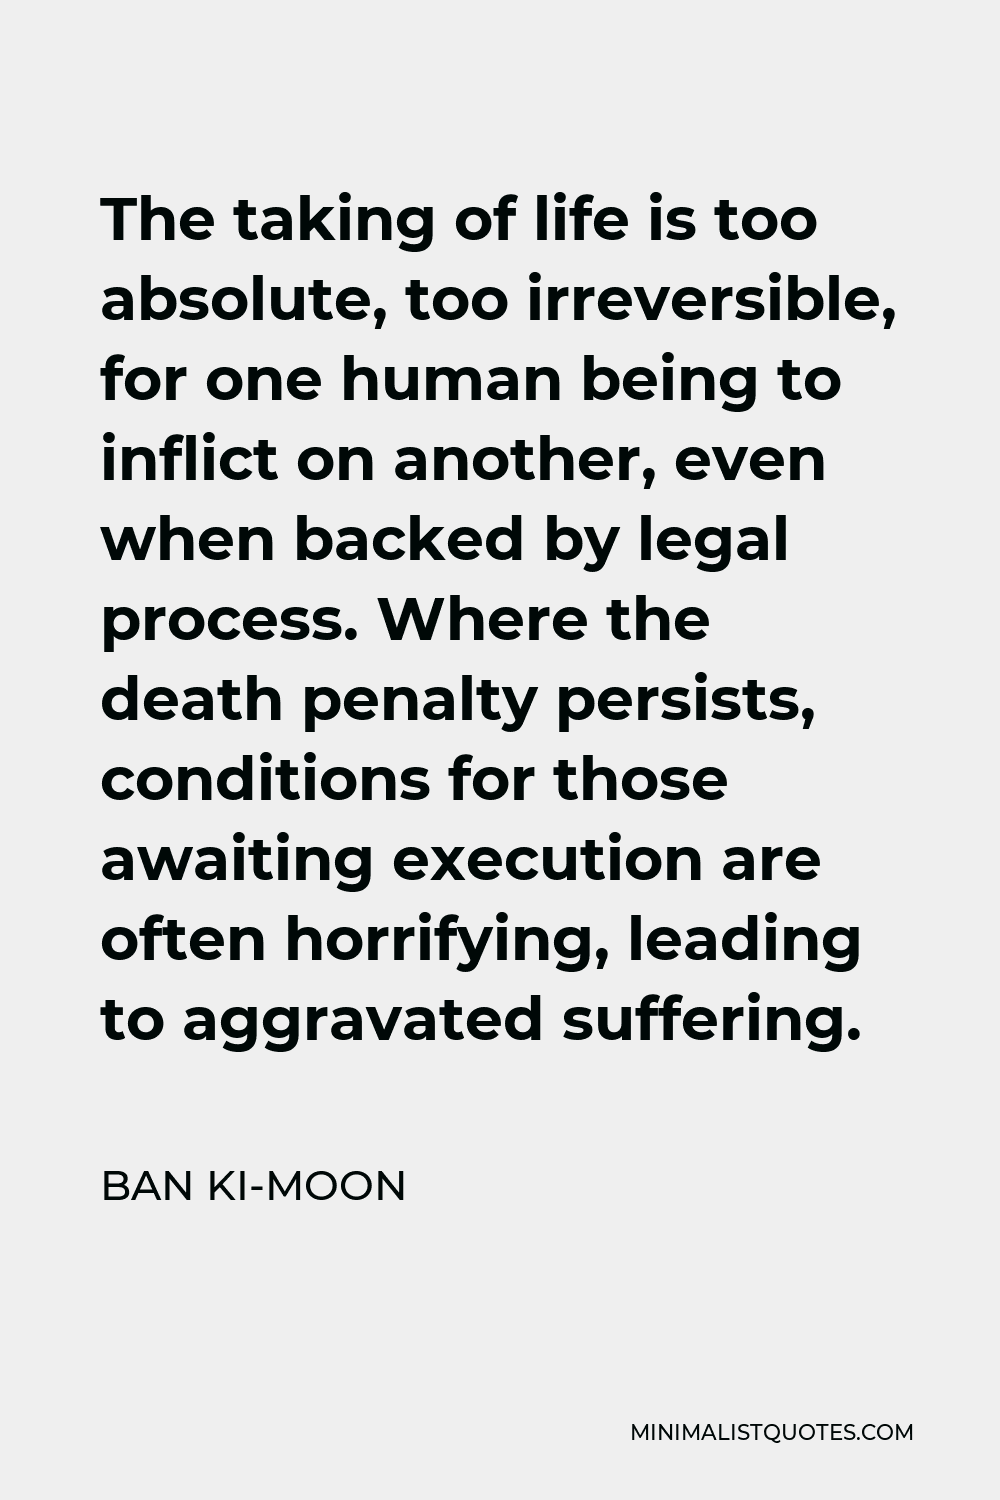 Ban Ki-moon Quote - The taking of life is too absolute, too irreversible, for one human being to inflict on another, even when backed by legal process. Where the death penalty persists, conditions for those awaiting execution are often horrifying, leading to aggravated suffering.